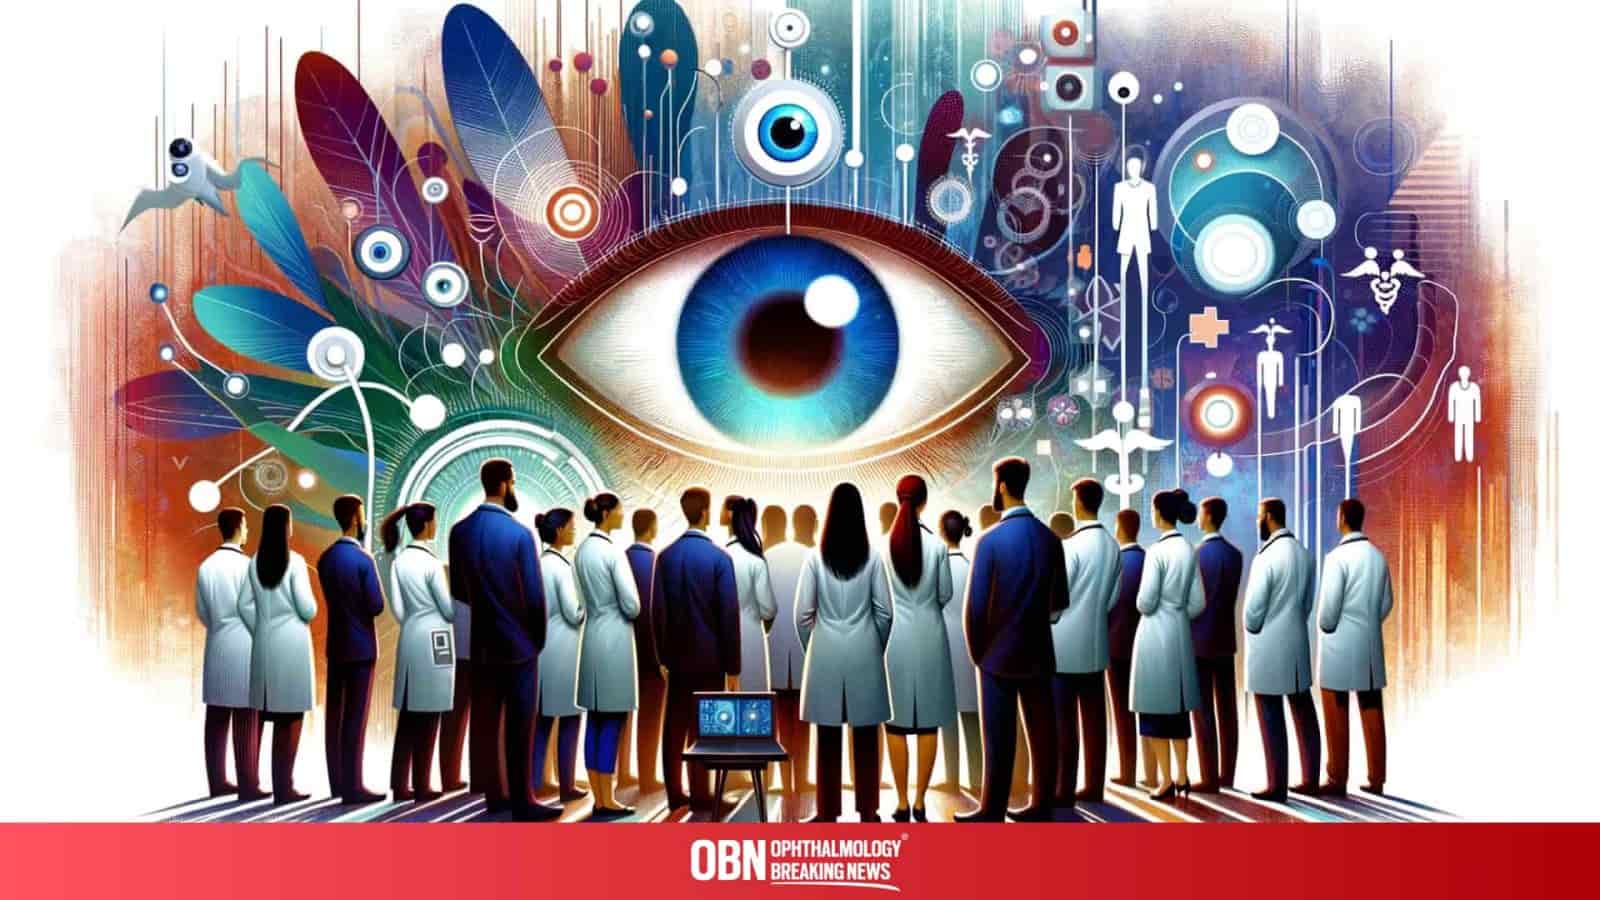 a drawing of a group of doctors and people in suits stand together facing some visuals regarding to eyes.